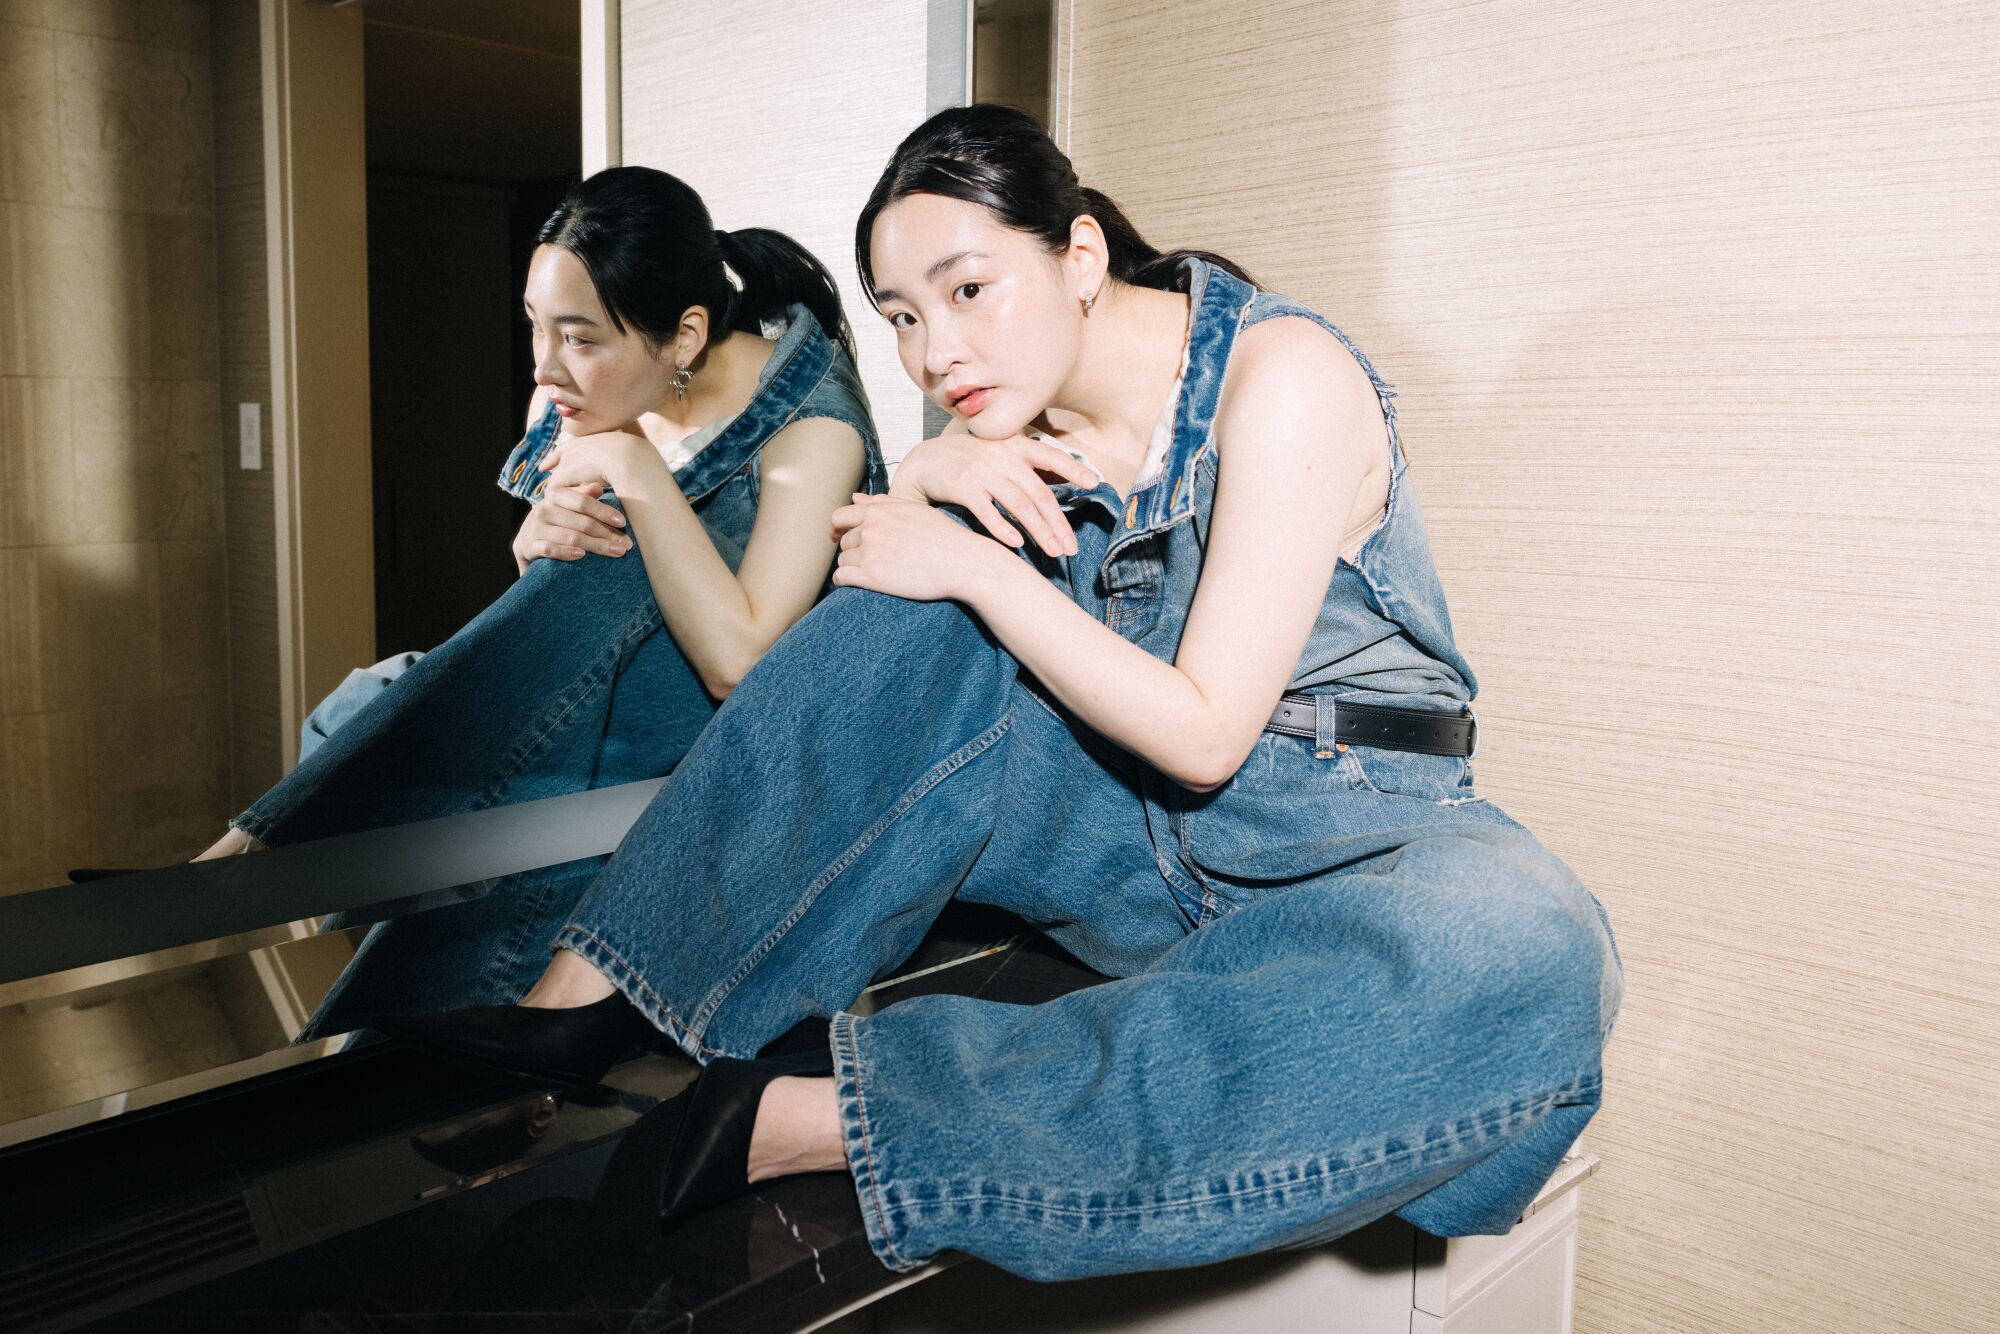 A woman in faded denim poses atop a bathroom vanity.